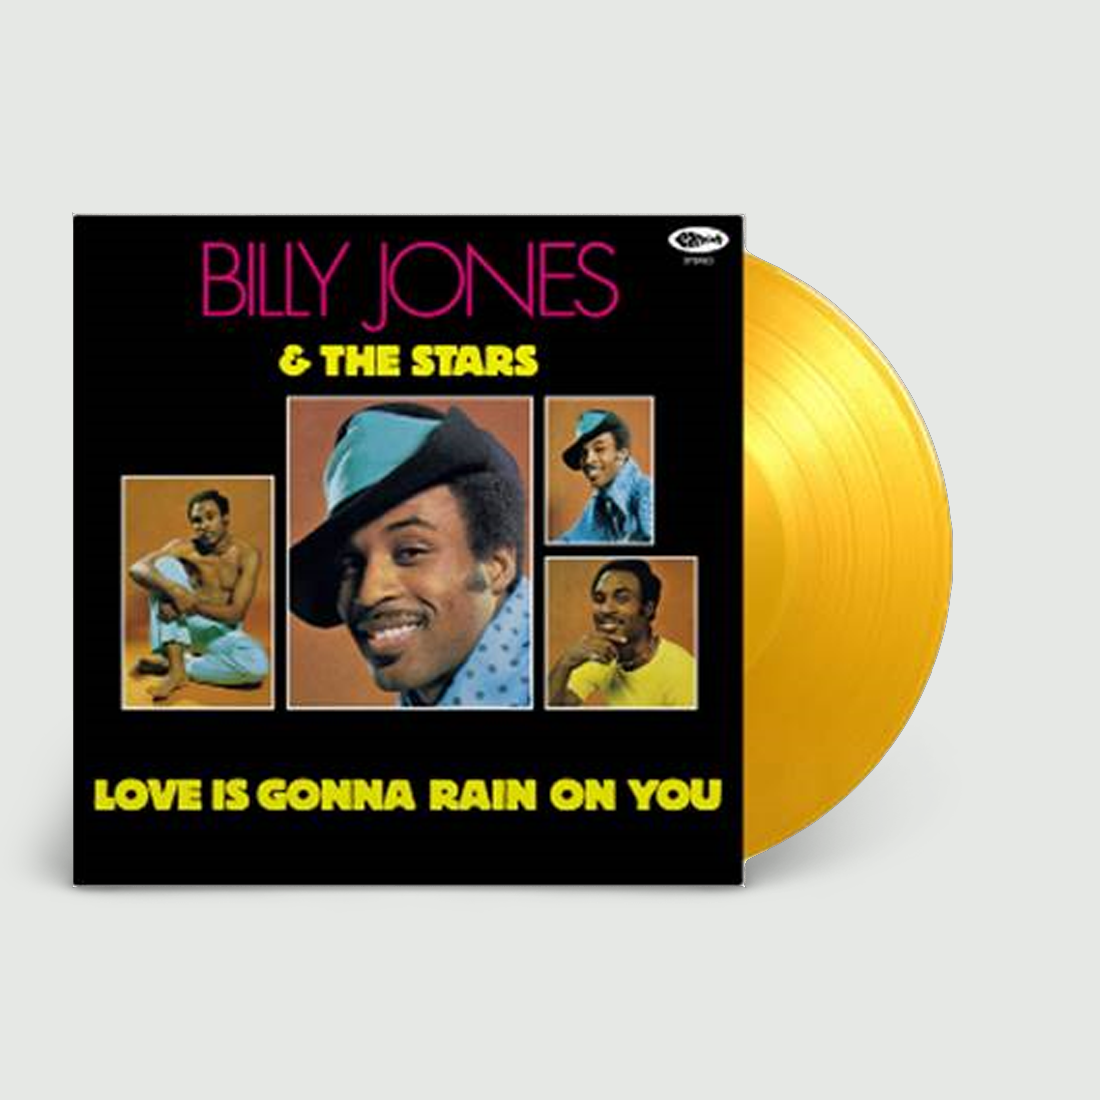 Love Is Gonna Rain On You: Limited Edition Translucent Yellow Vinyl LP